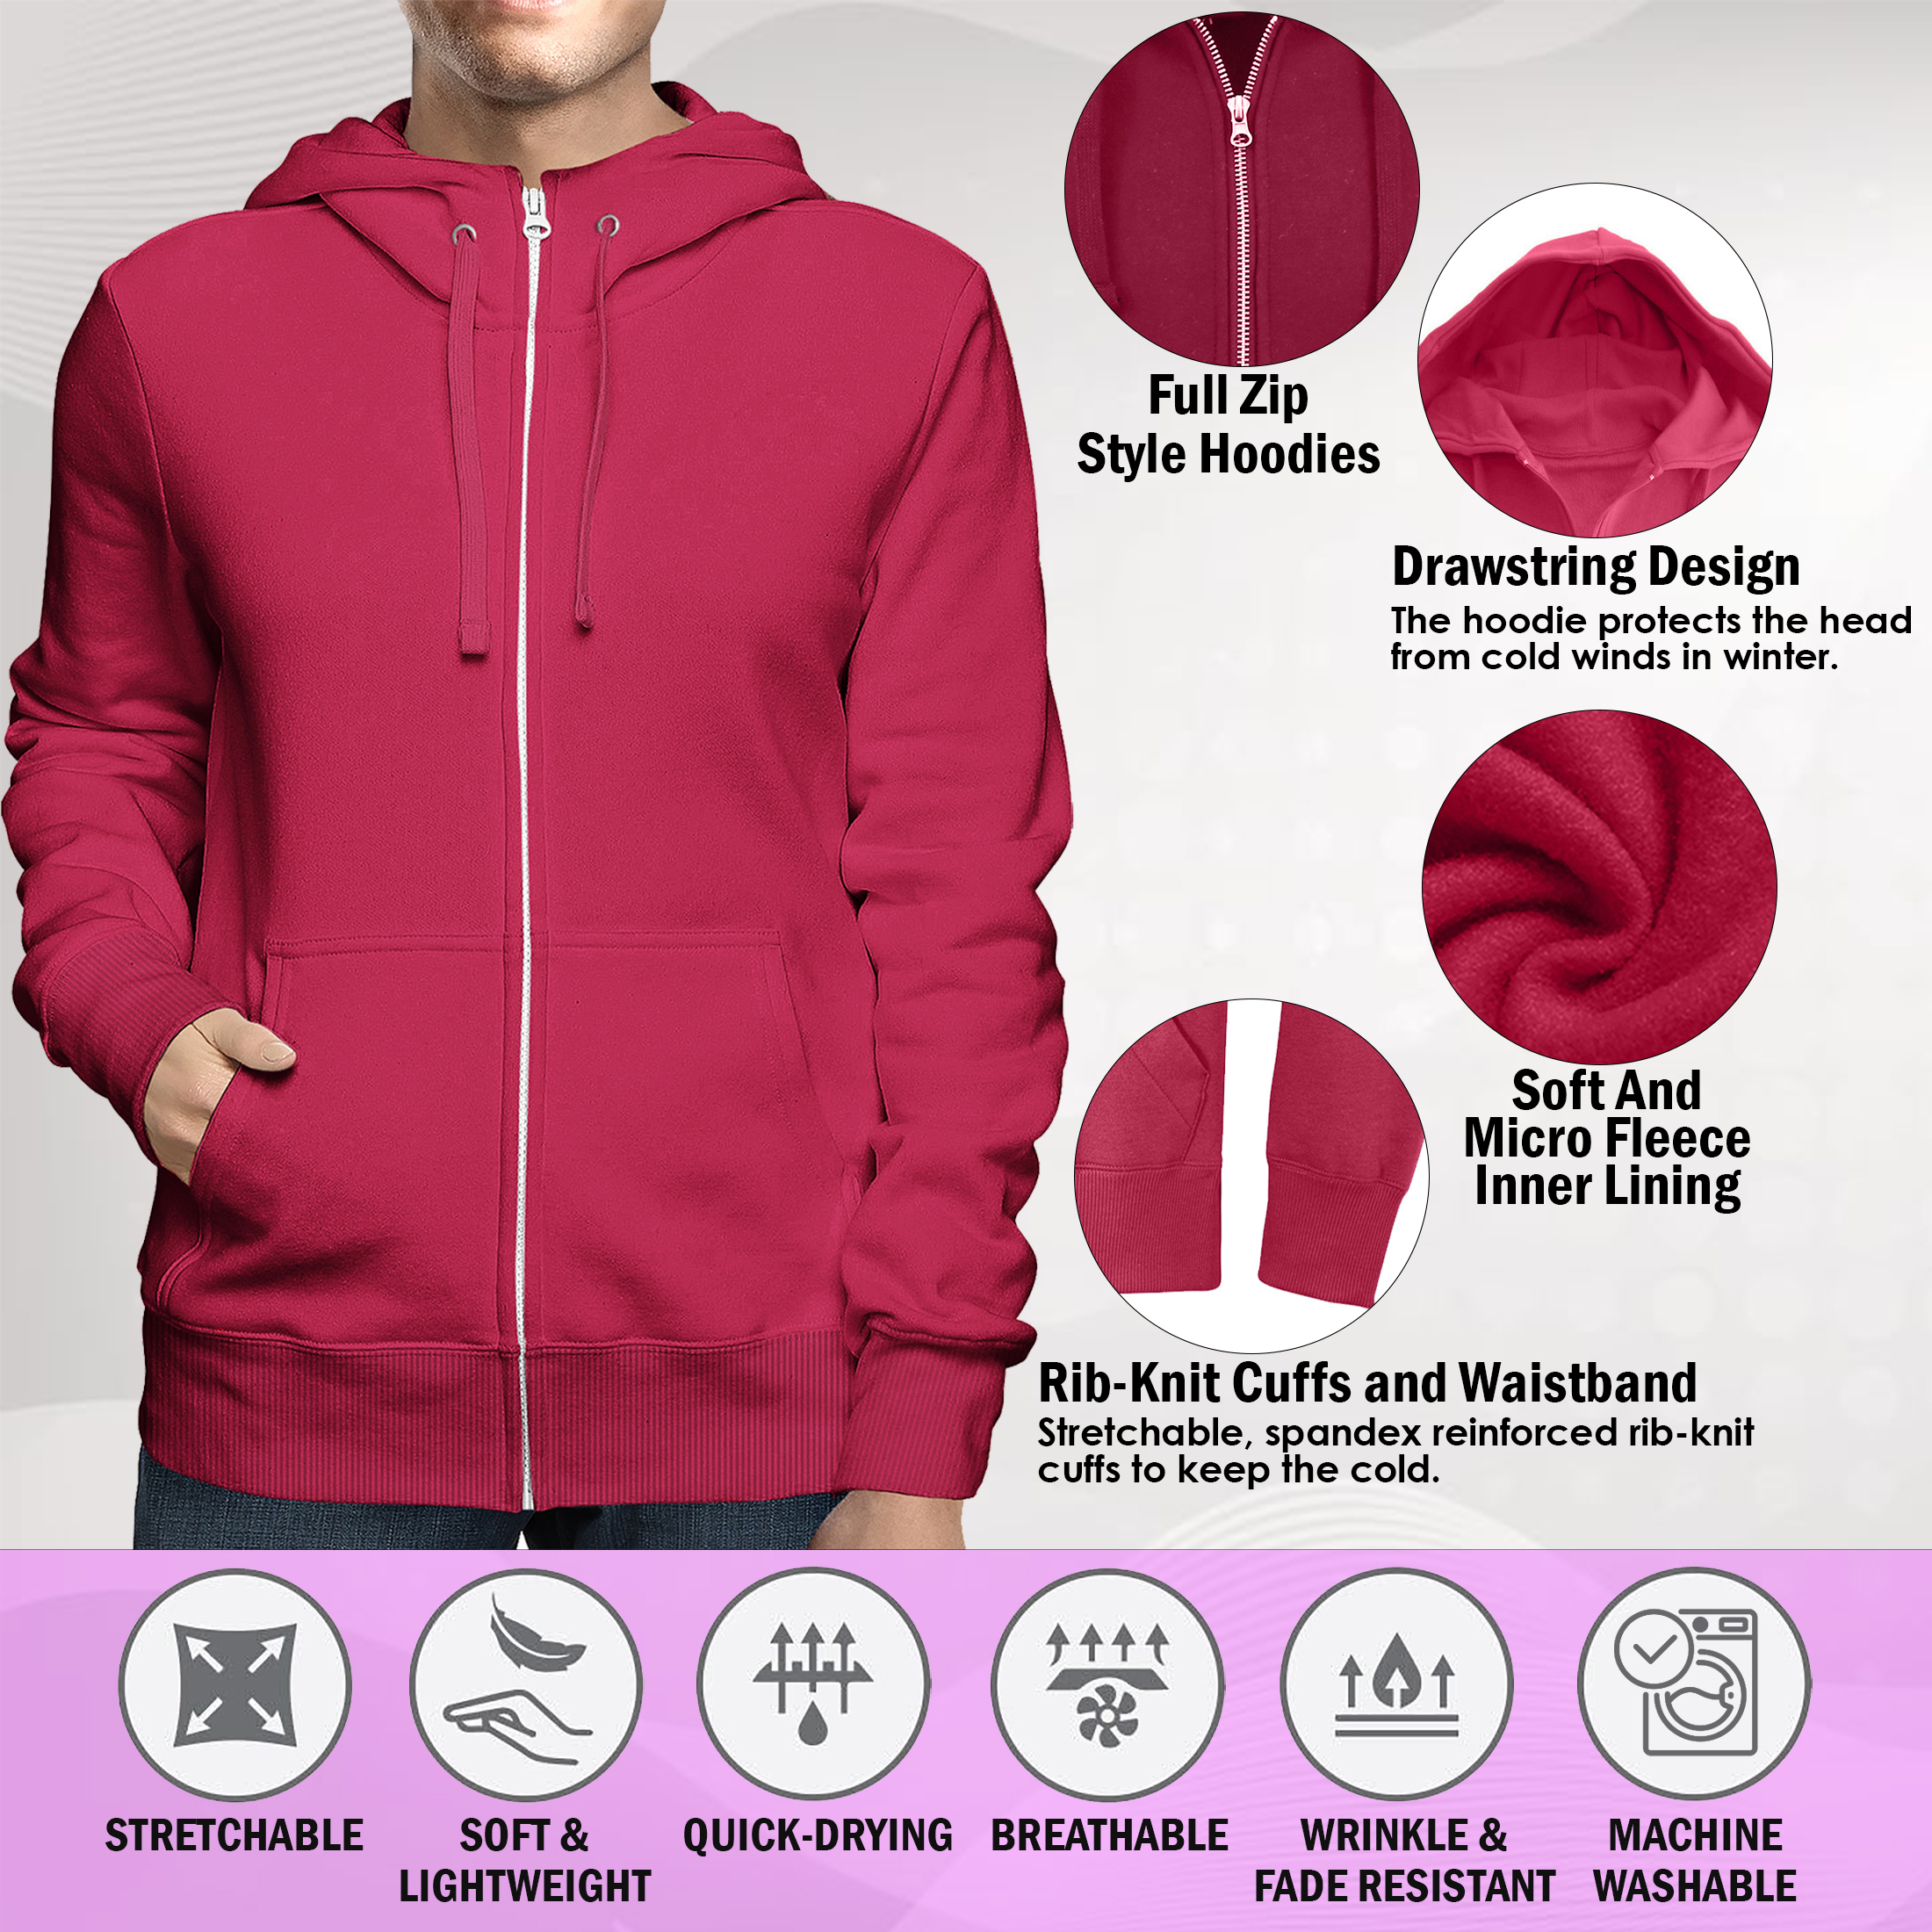 2-Pack: Men's Full Zip Up Fleece-Lined Hoodie Sweatshirt (Big & Tall Size Available) - Burgundy & Olive, 4x-large